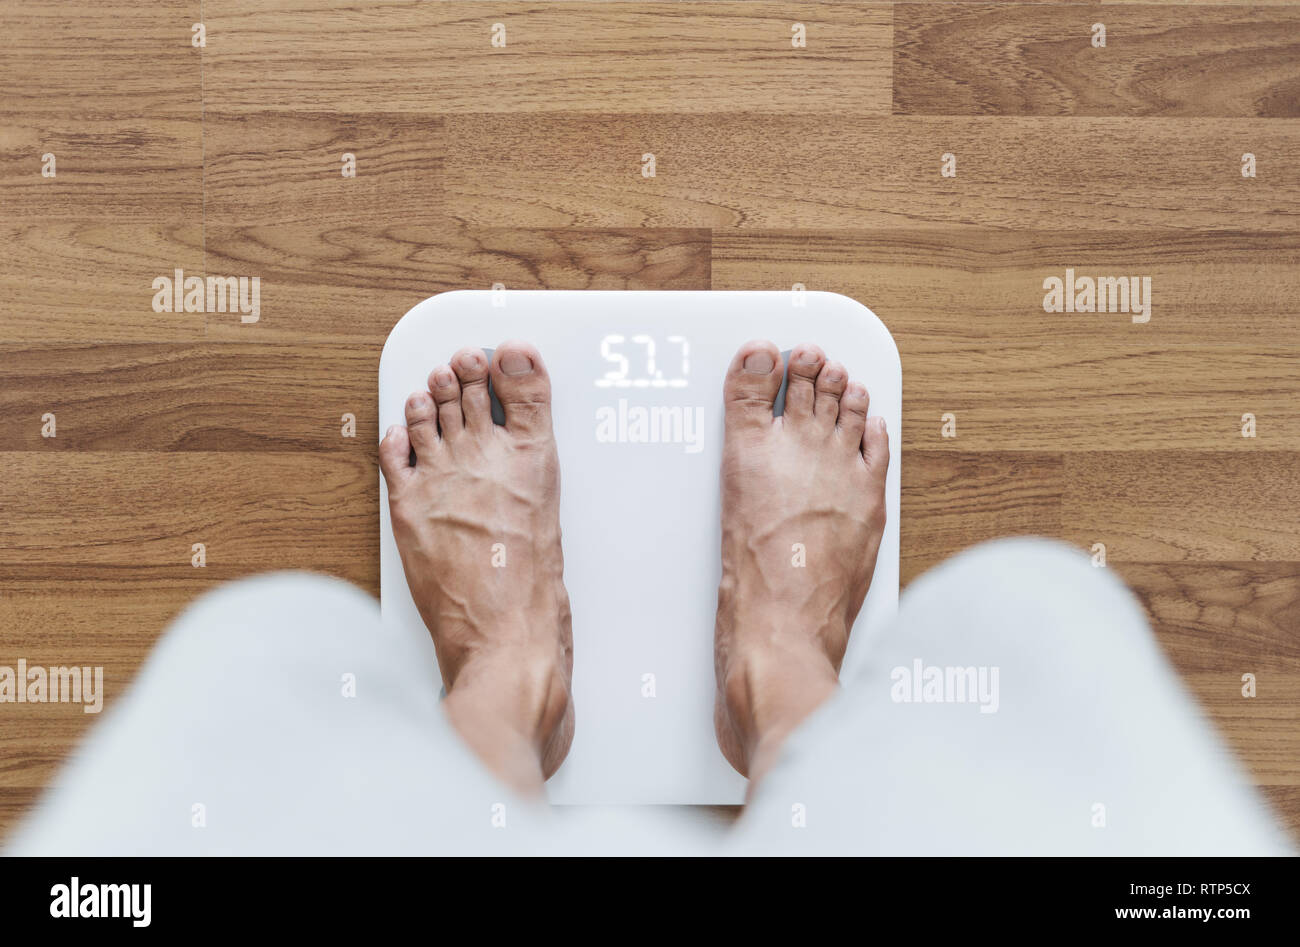 Top view, a man using body scale checking body weight, dieting and lose weight concept Stock Photo